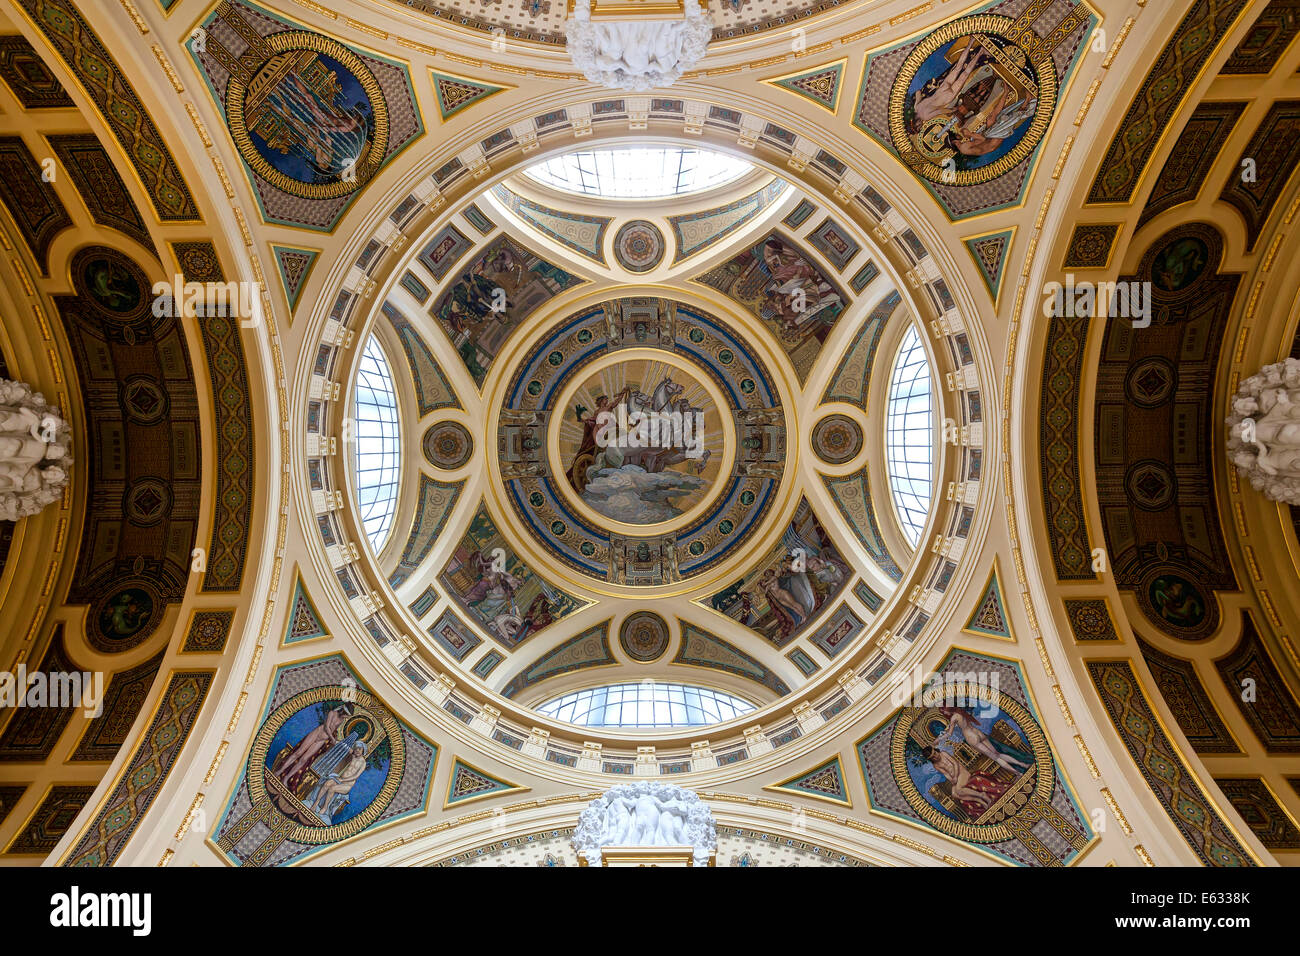 Dome of the entrance hall, Széchenyi Thermal Bath or Széchenyi-gyógyfürdő, Neo-Baroque style, the largest medicinal bath in Stock Photo